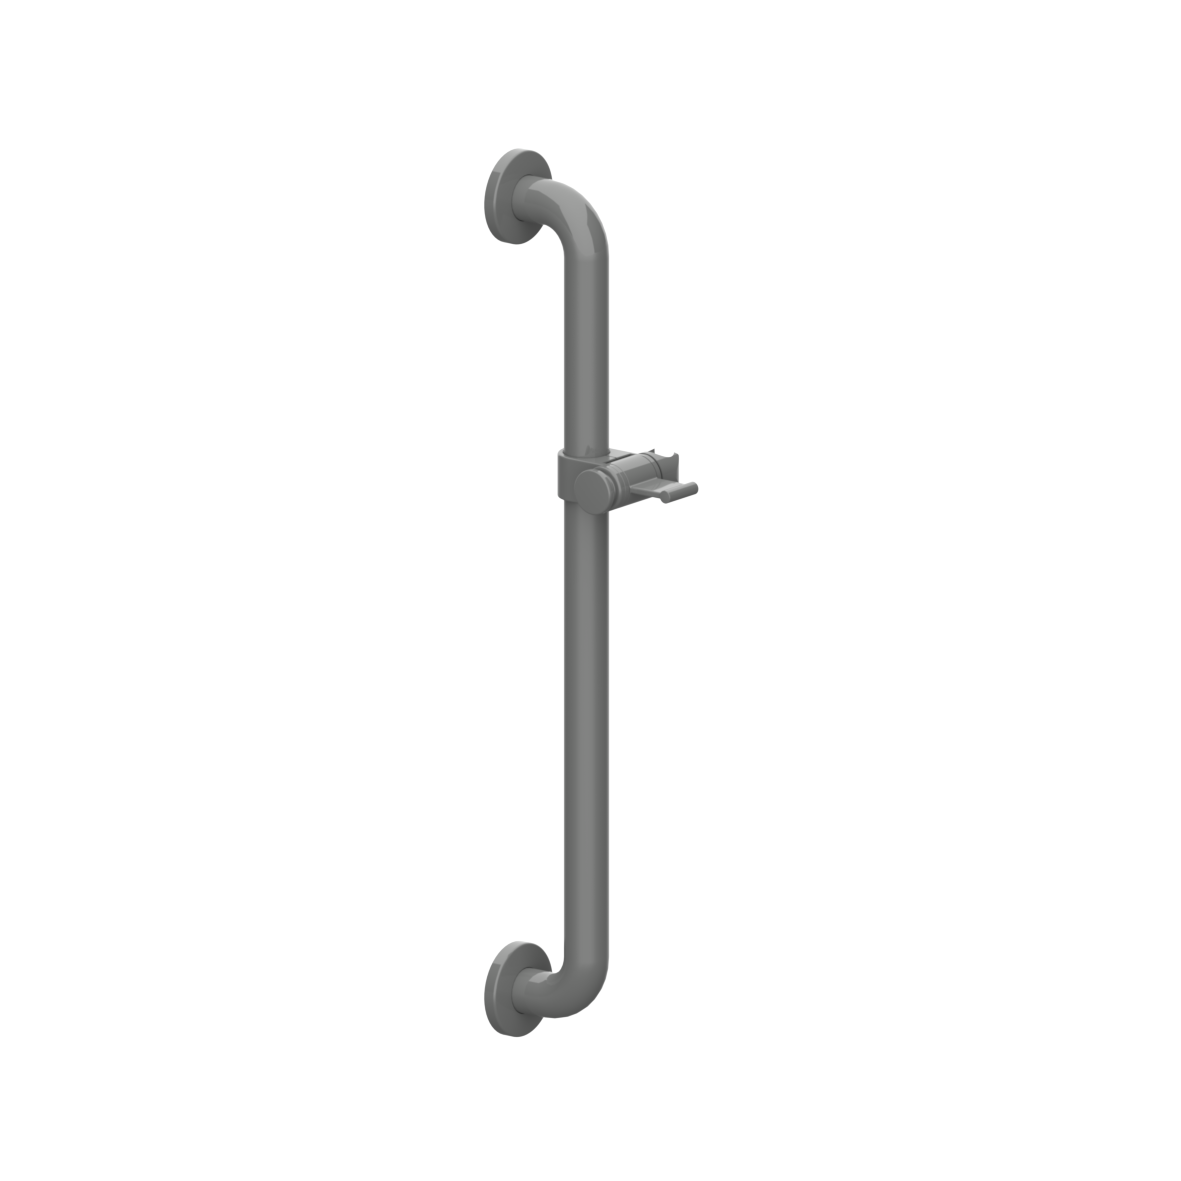 Special Care Adipositas Shower head rail, left and right, 600 mm, Dark grey